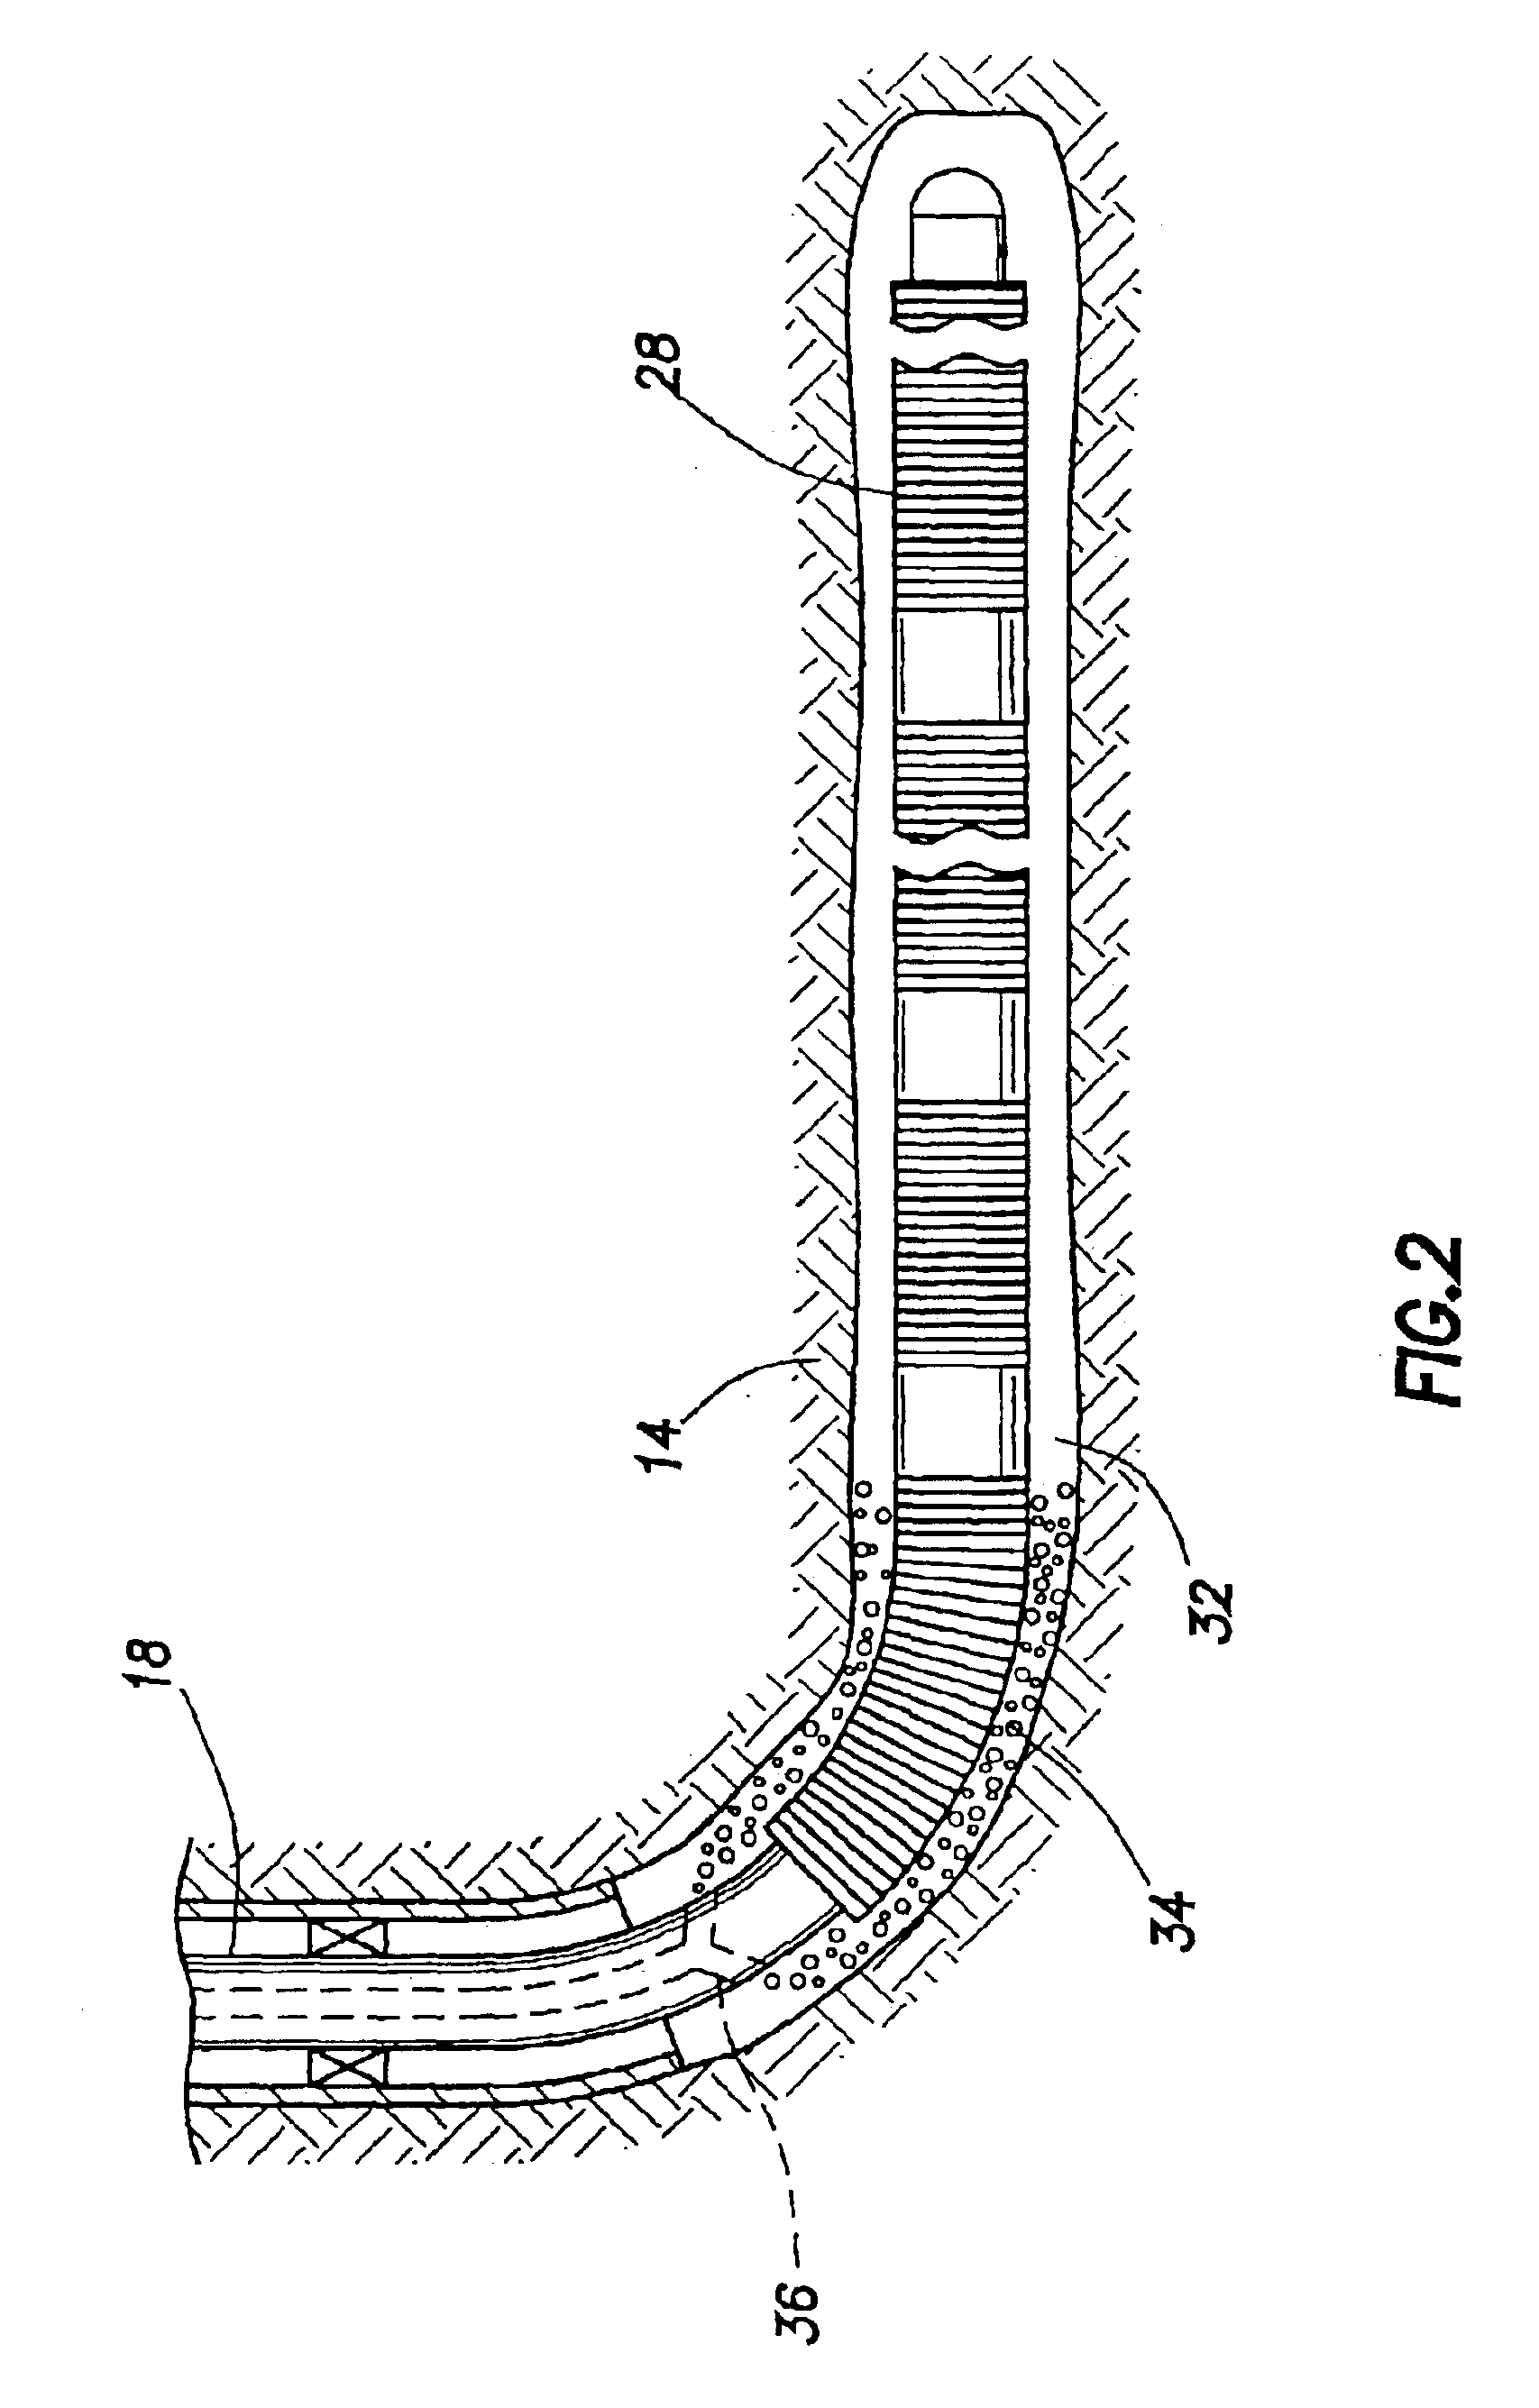 Flow control apparatus for use in a wellbore